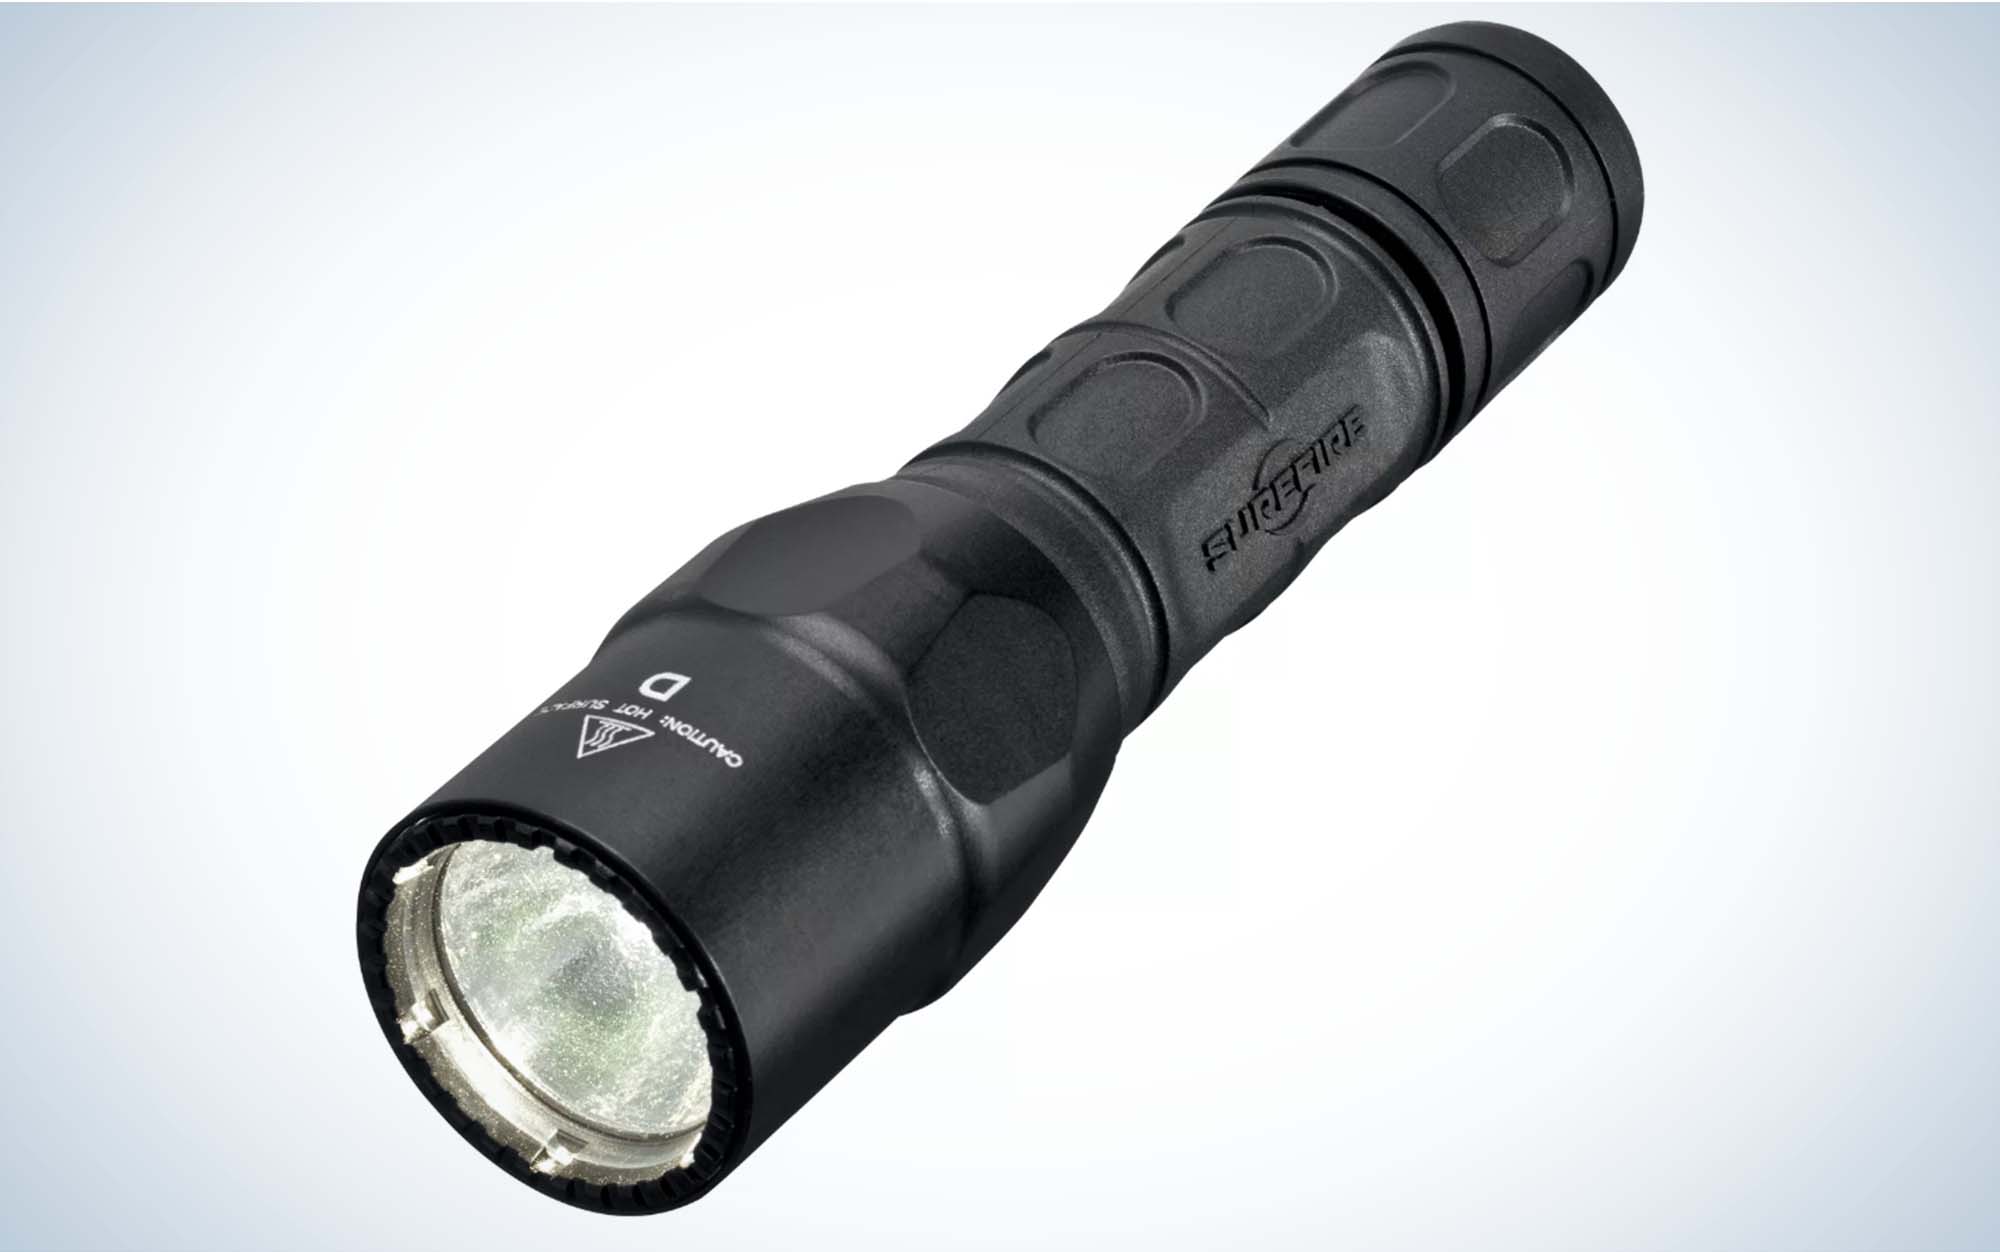 The Surefire G2X Pro is the best overall hunting flashlight.